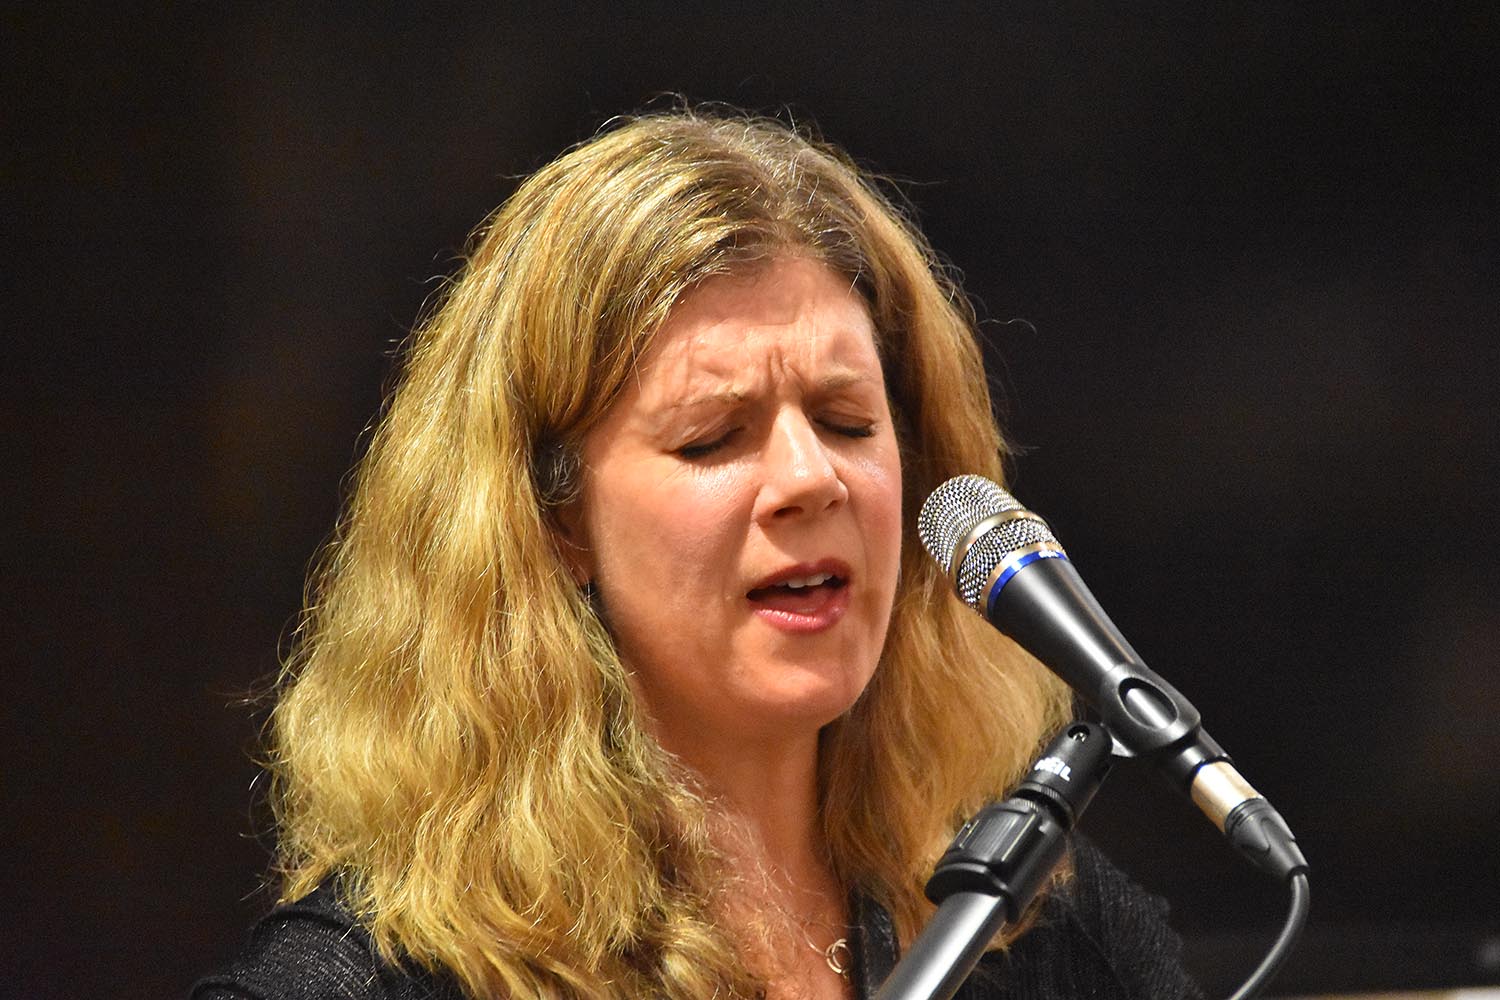 Singer-songwriter Dar Williams '89 performed, and read from her new book, at Wesleyan RJ Julia Bookstore on Oct. 10.